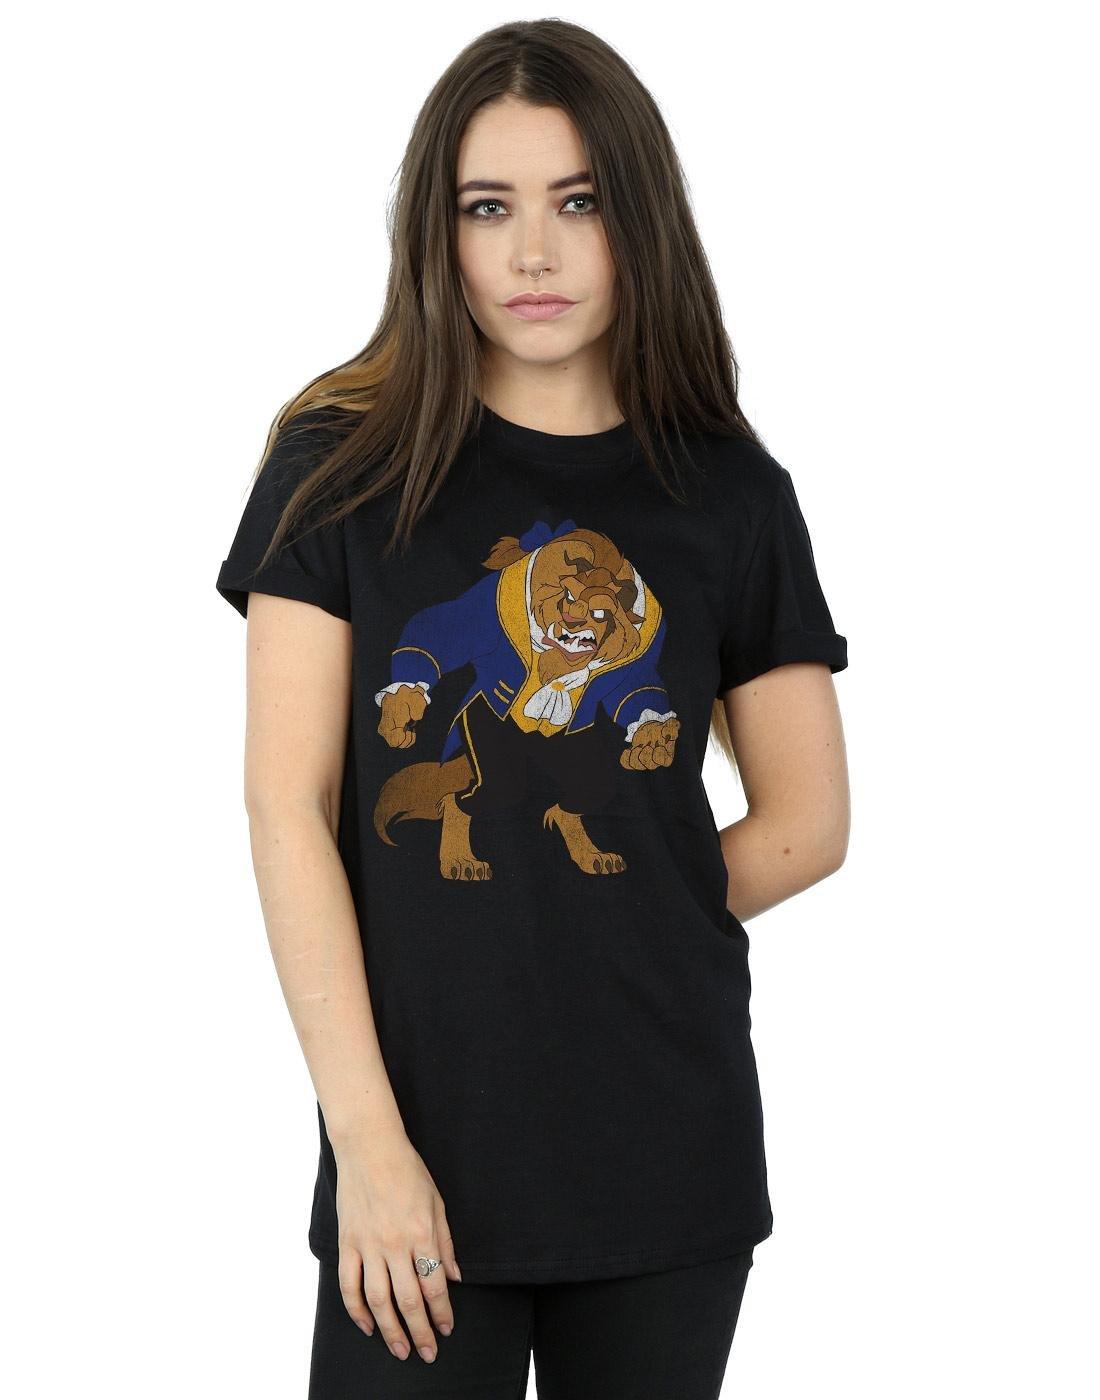 Beauty And The Beast  Classic TShirt 